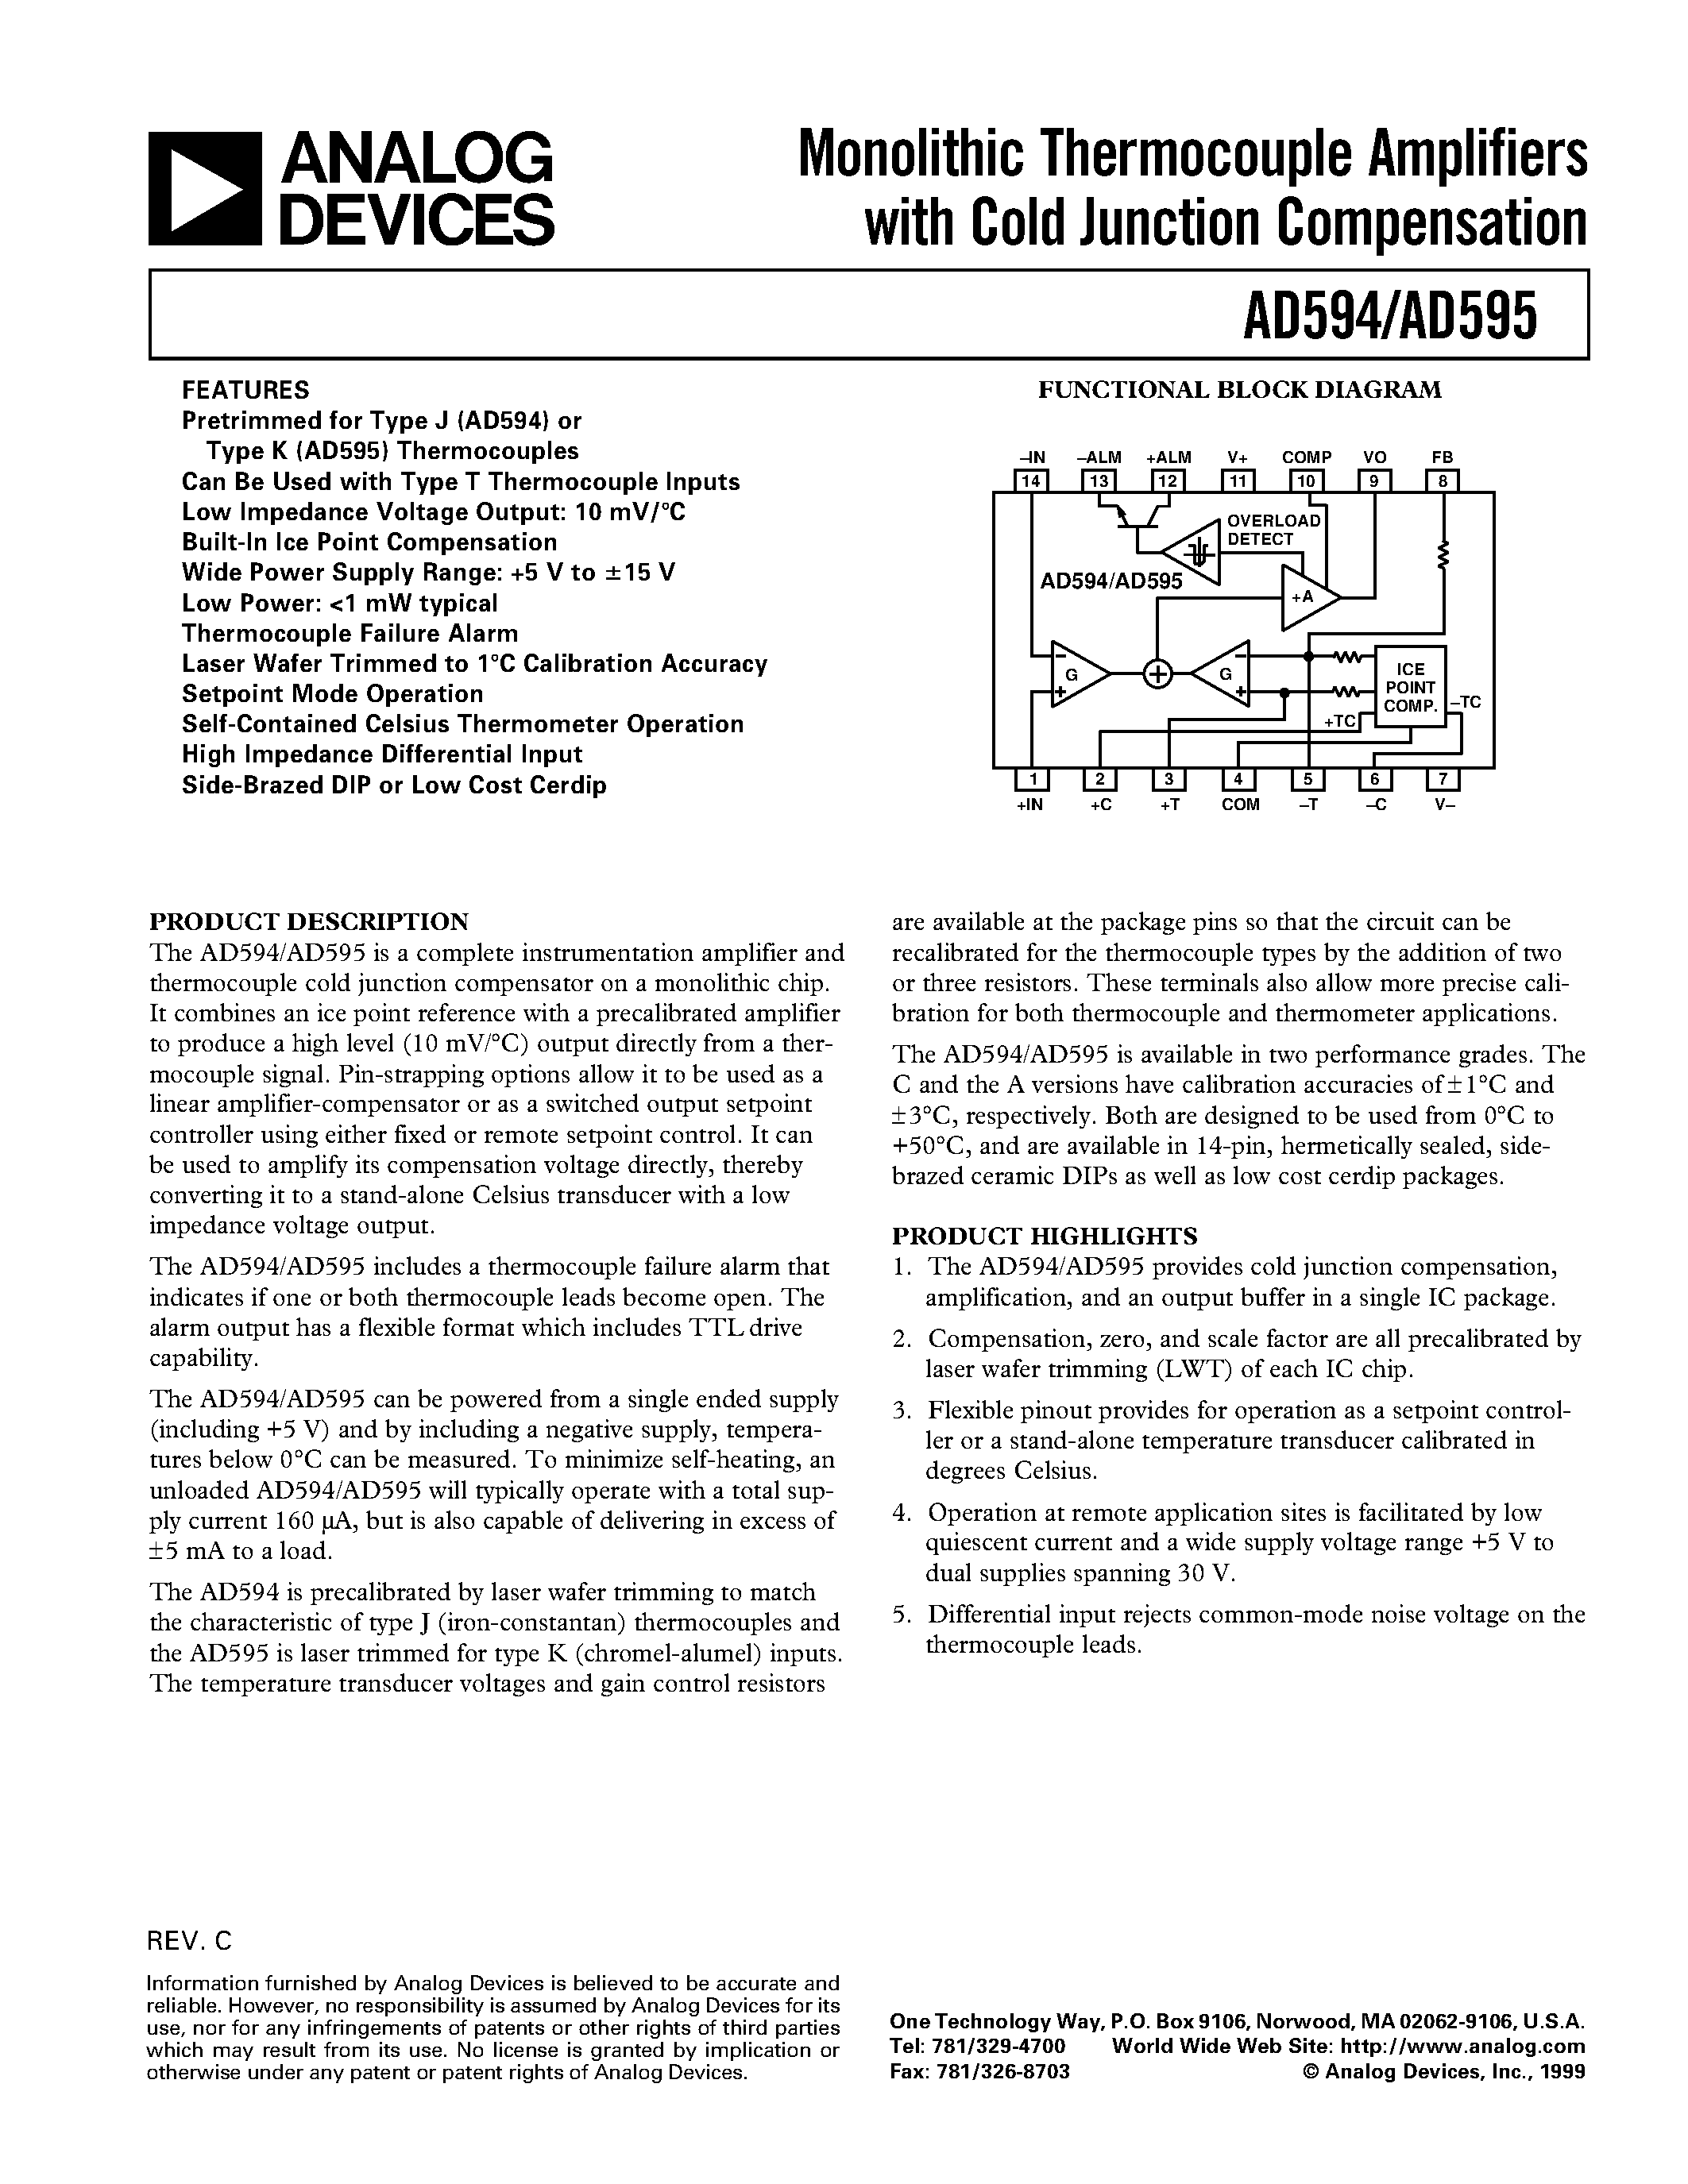 Datasheet AD595A - Monolithic Thermocouple Amplifiers with Cold Junction Compensation page 1